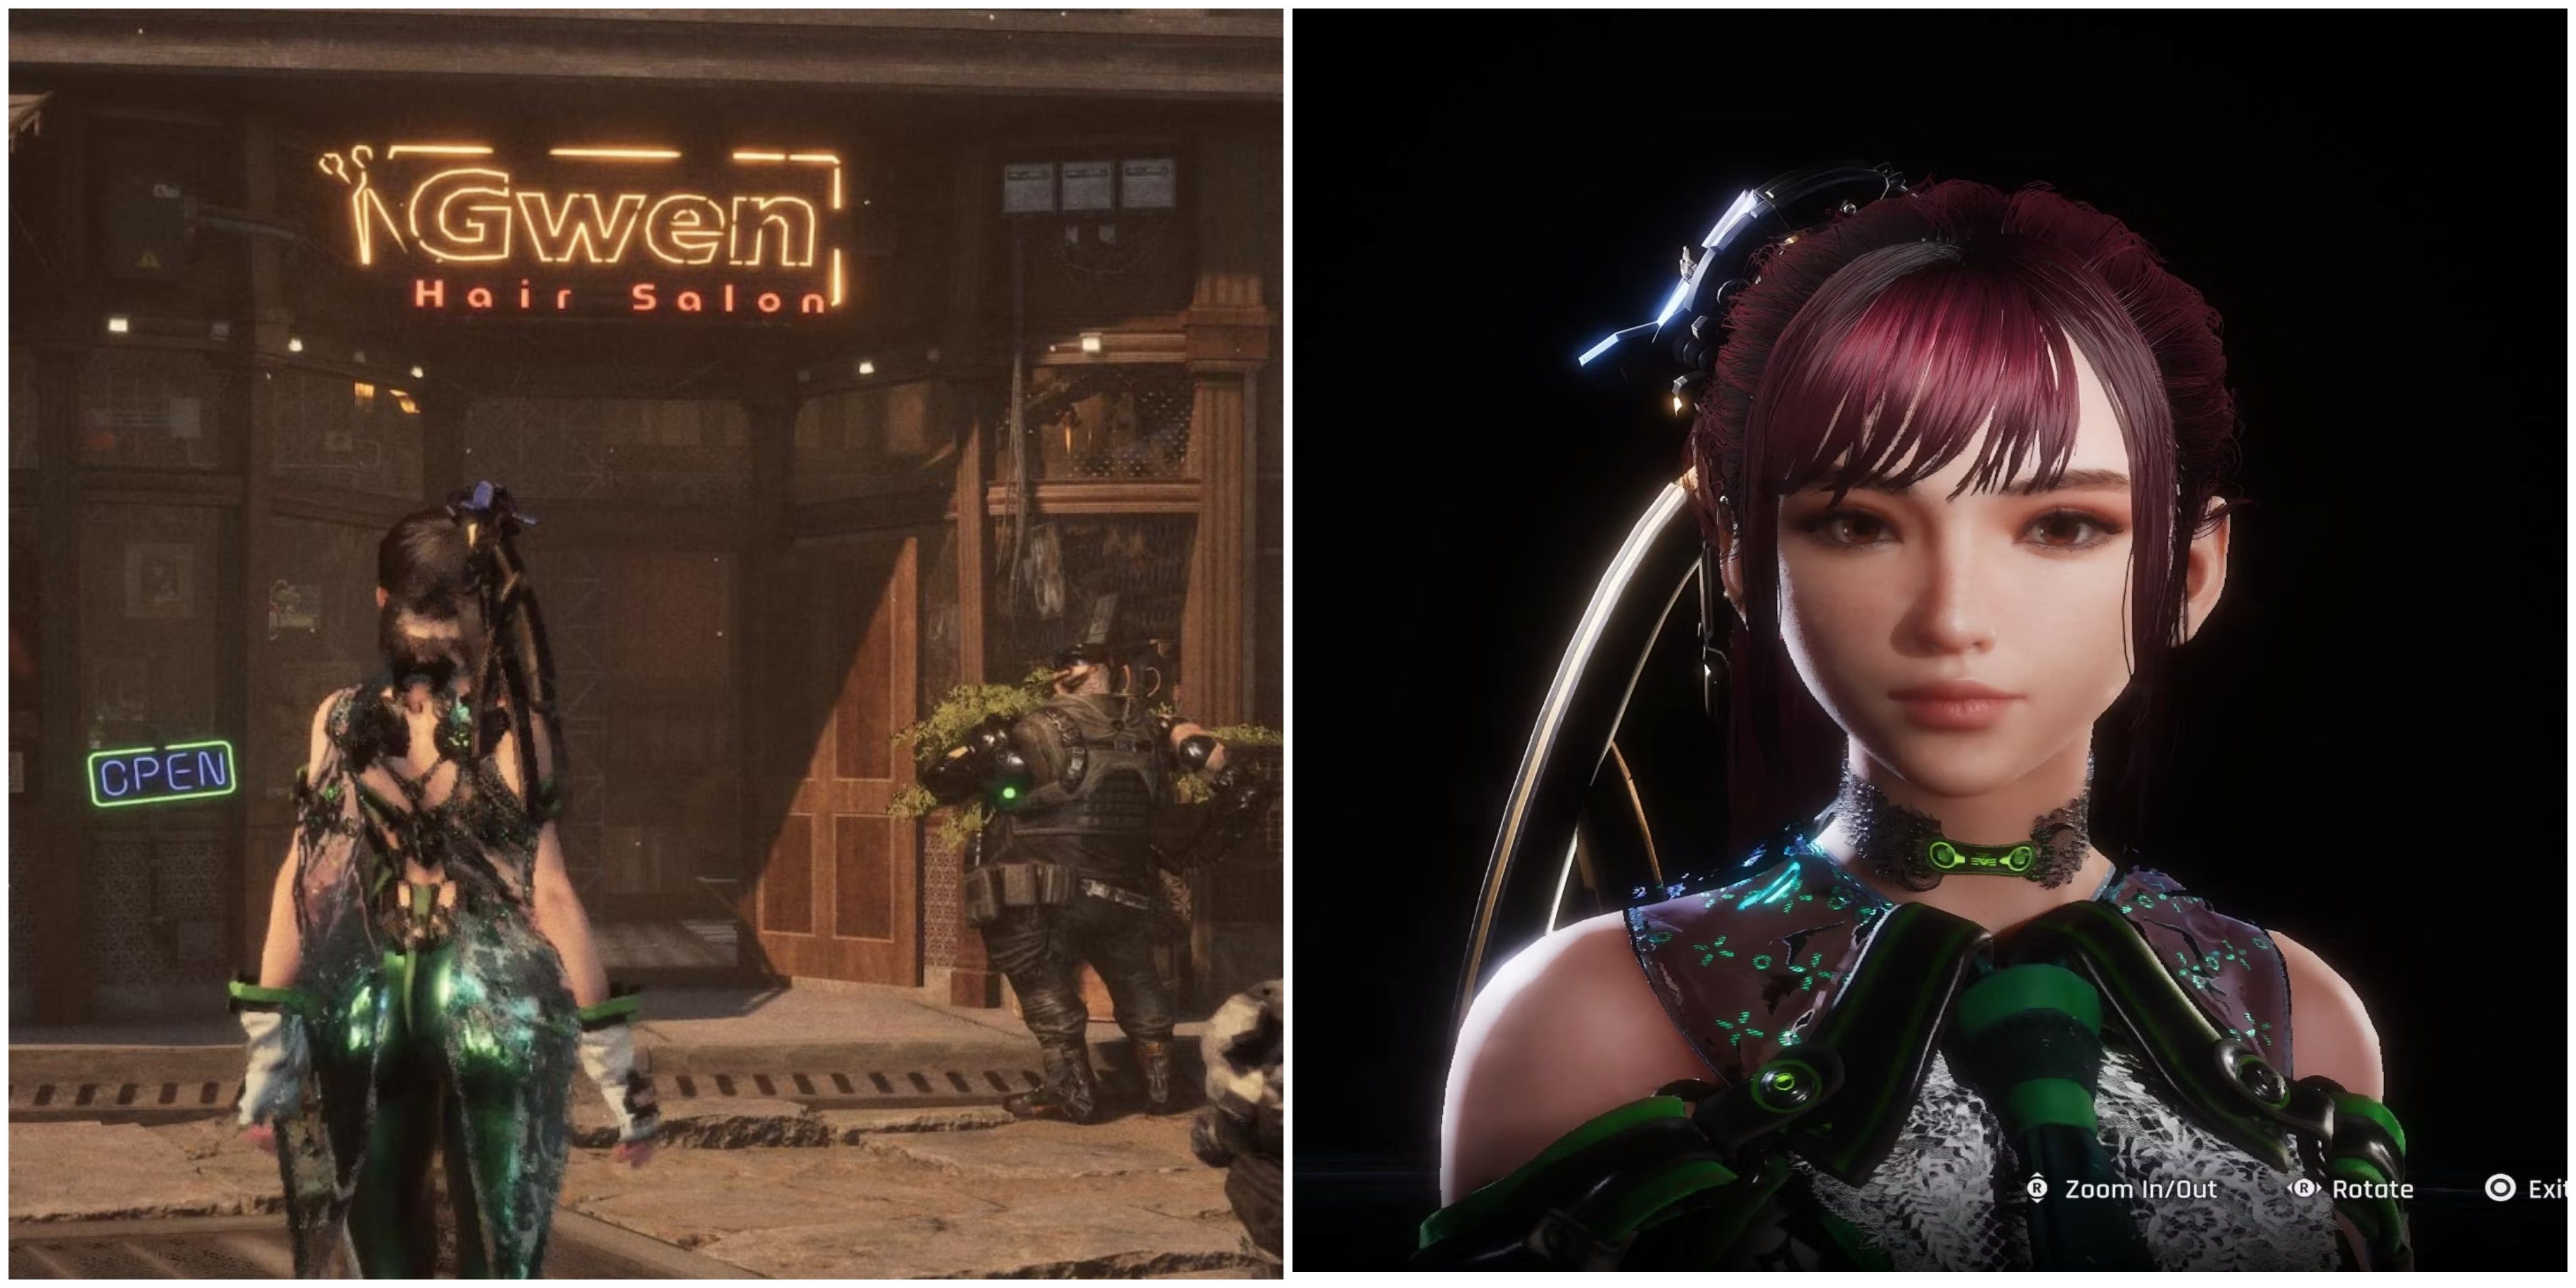 A split image of the Hair Salon in Stellar Blade and a closeup shot of Eve's face